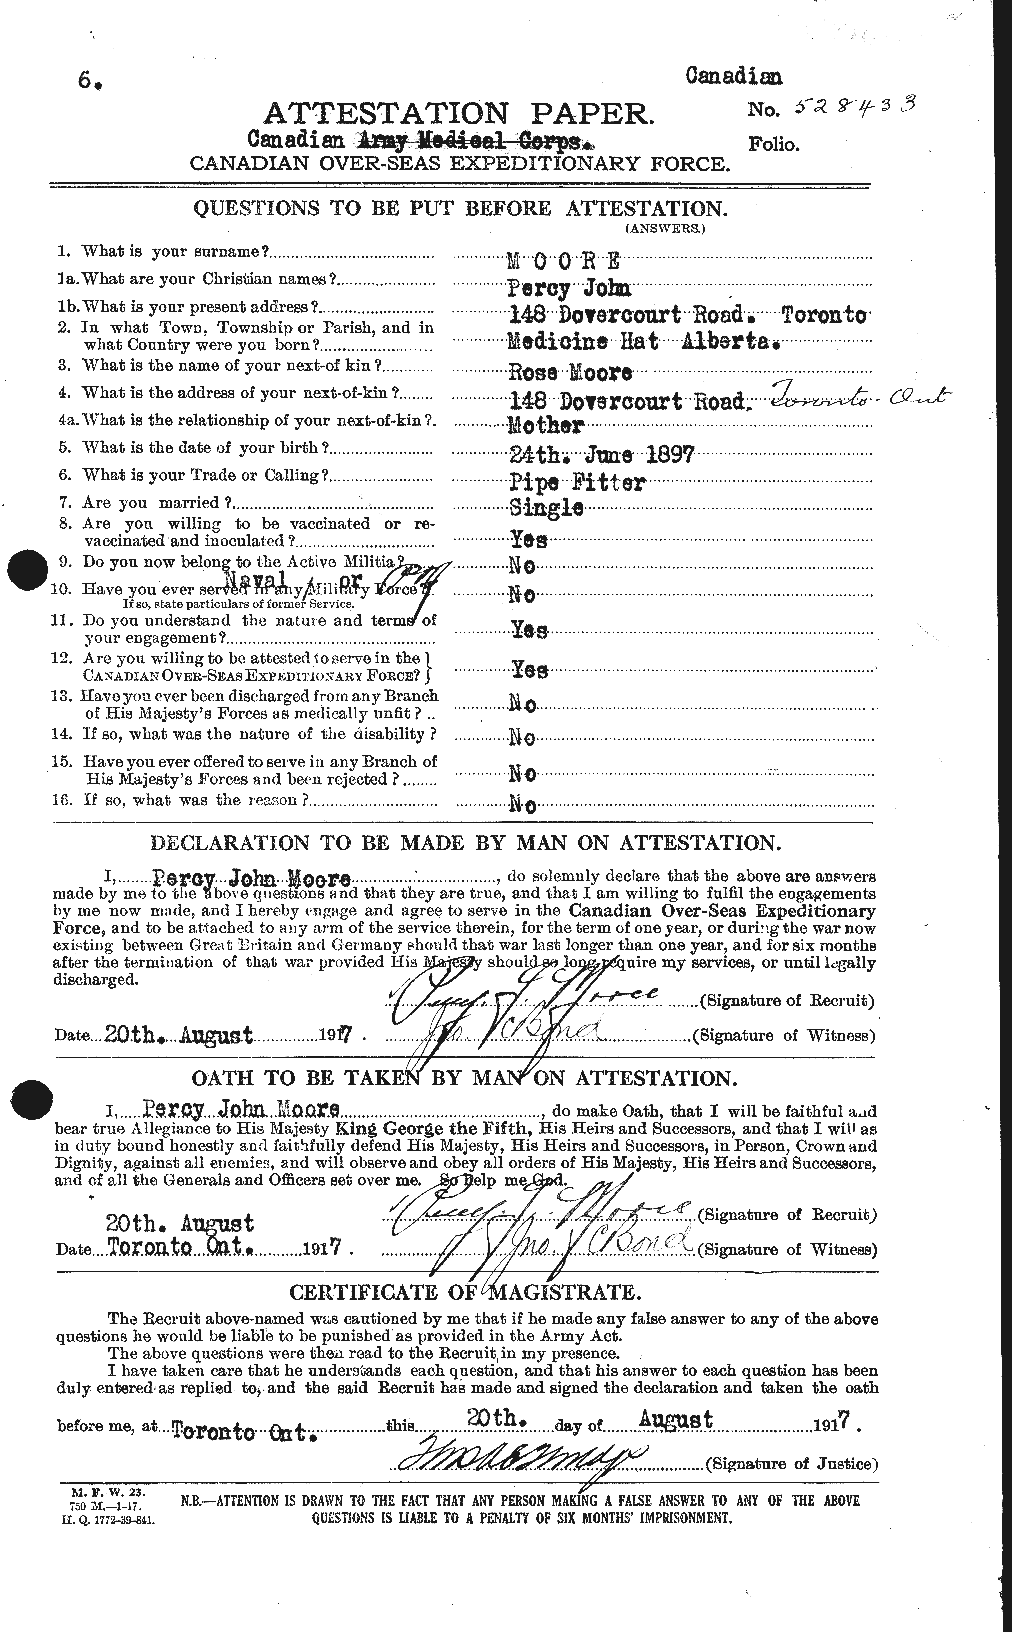 Personnel Records of the First World War - CEF 503491a